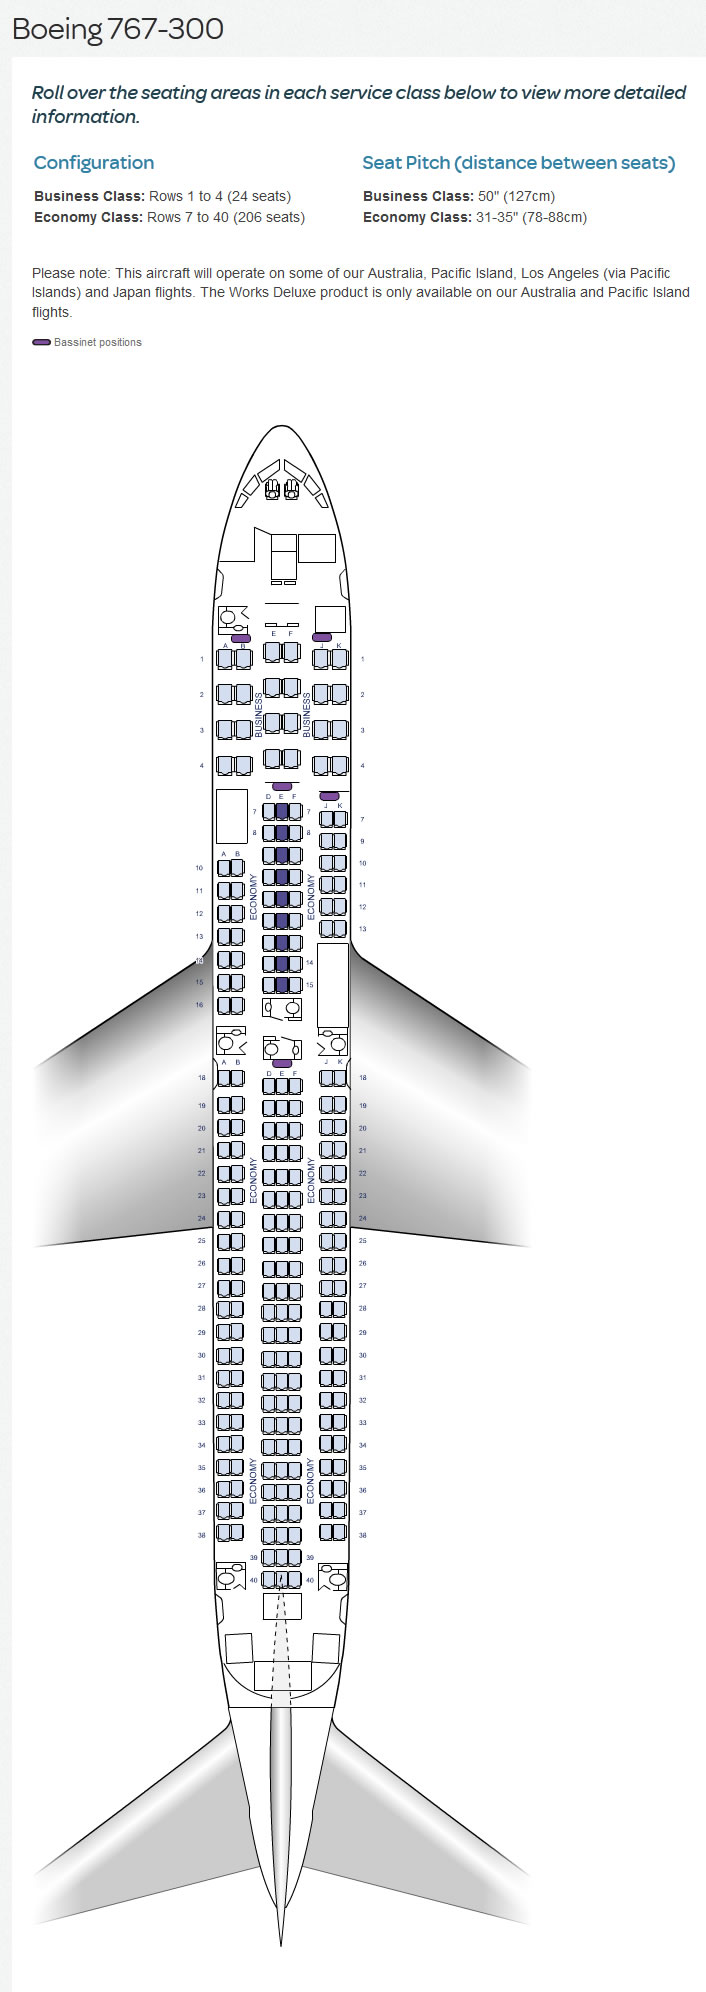 AIR NEW ZEALAND AIRLINES BOEING 767-300 AIRCRAFT SEATING CHART